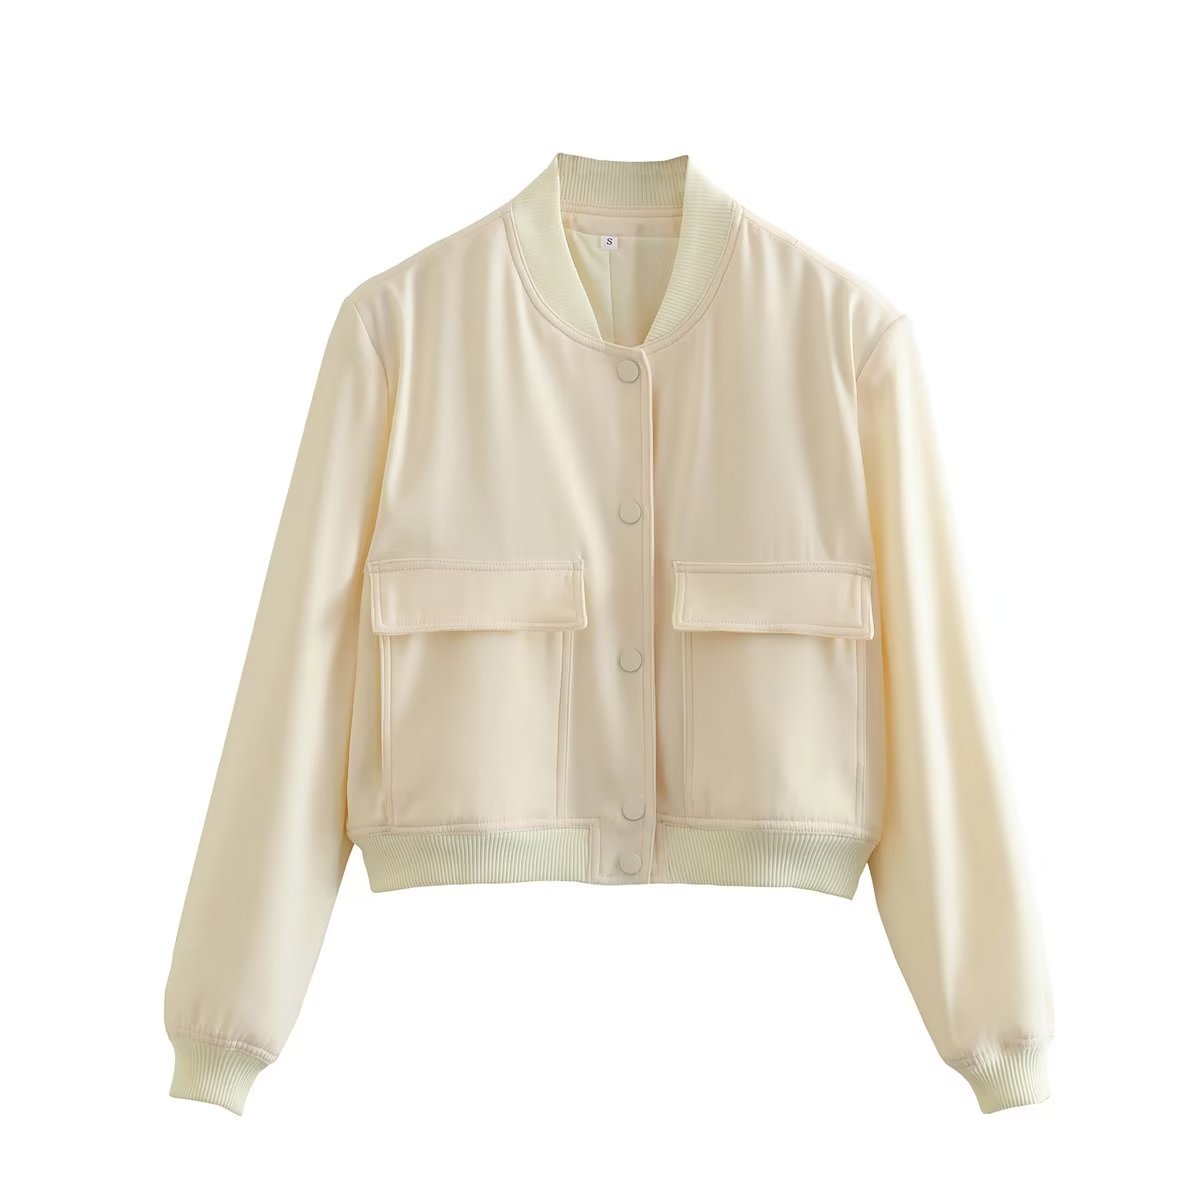 Chic Casual Bomber Jacket